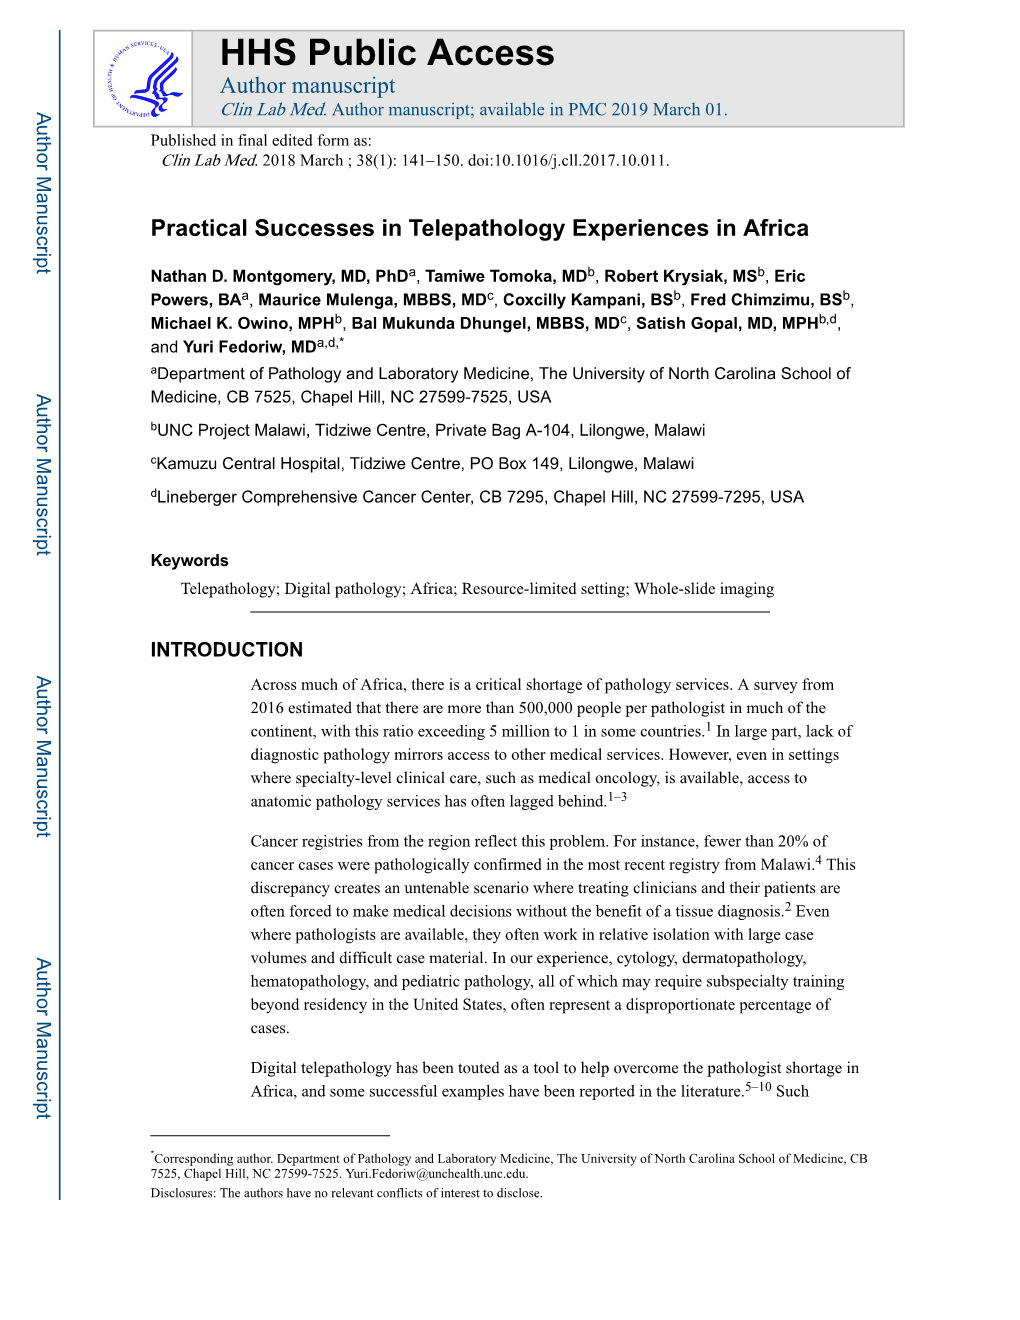 Practical Successes in Telepathology Experiences in Africa